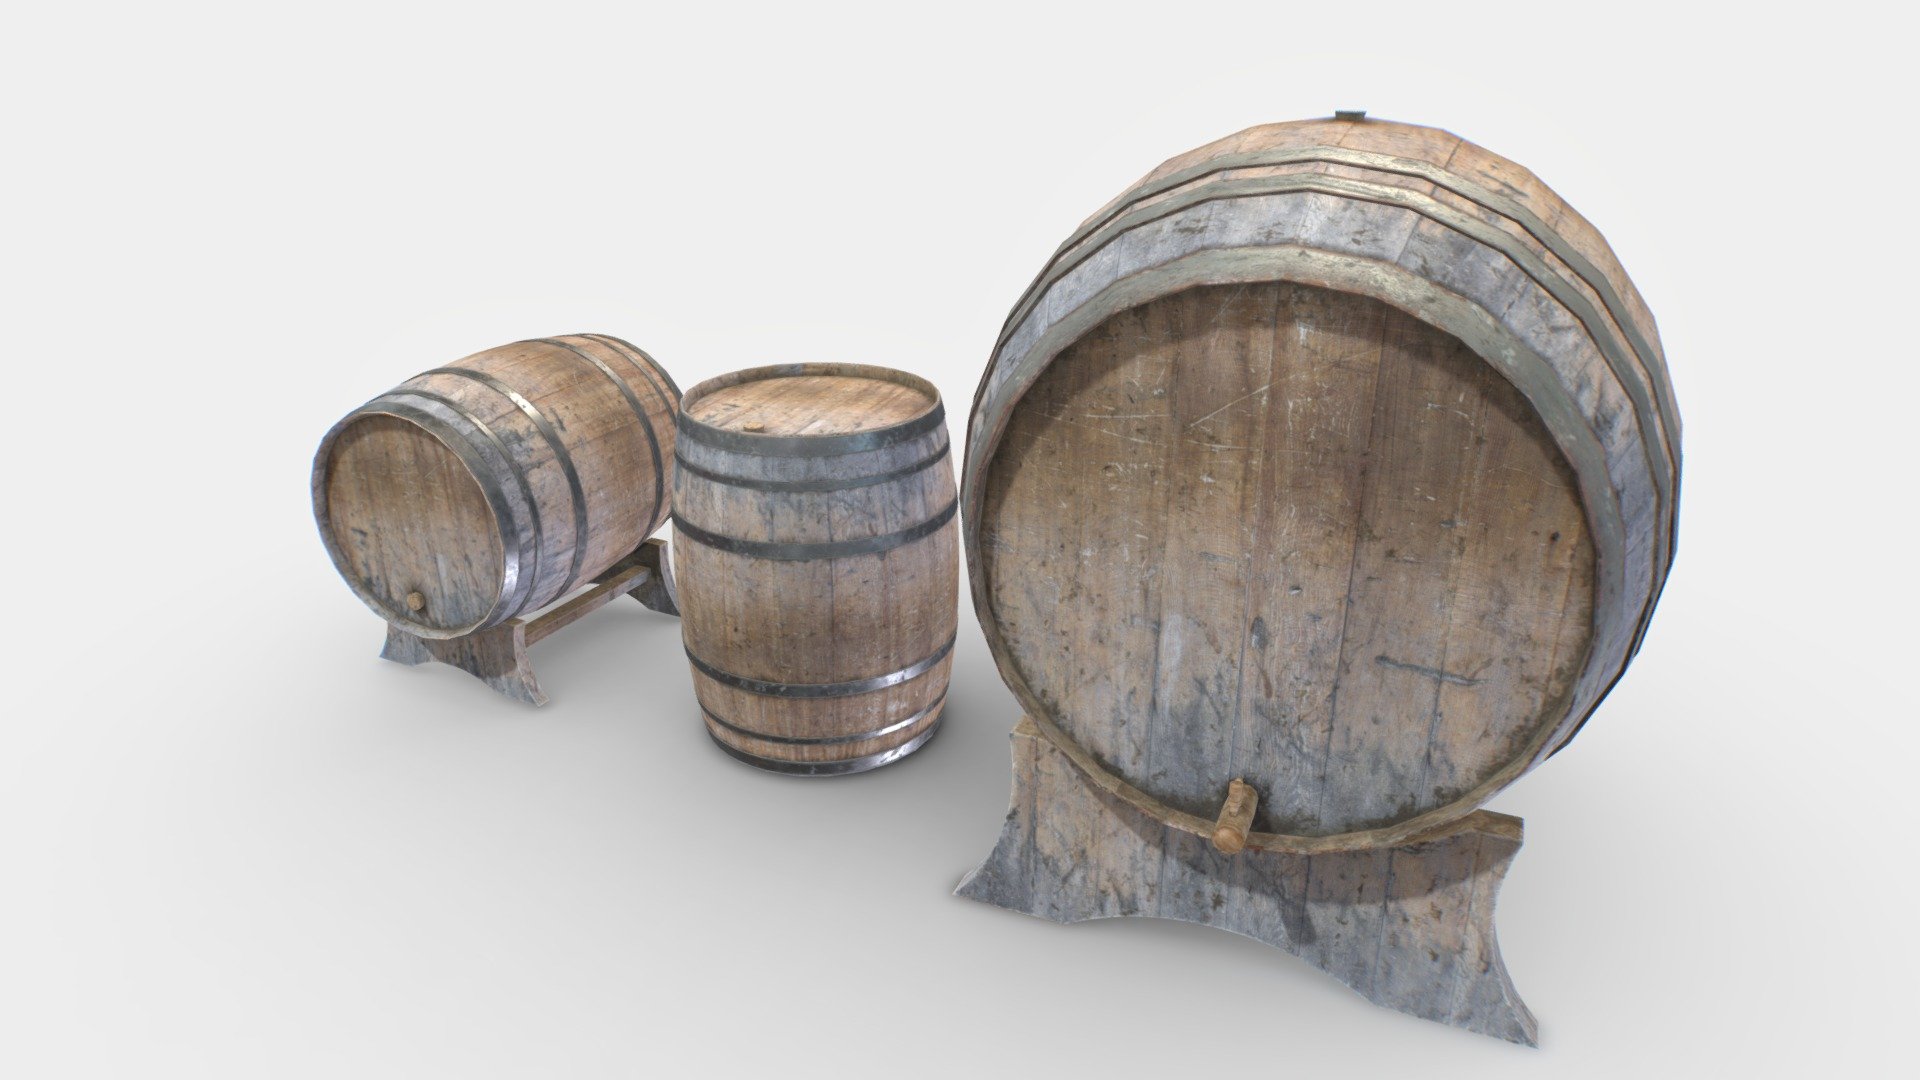 2 wooden barrels based in realistic ones and with 3 pieces, 2 barrels and 1 support.

Comes with PBR 4096pix textures including Albedo, Normal, Roughness, Metalness, AO.

2 texture sets, for big barrel/support and small barrel. TGA textures

Suitable for basements, dungeons, medieval scenes, cellars, etc..

Realistic scale 3d model